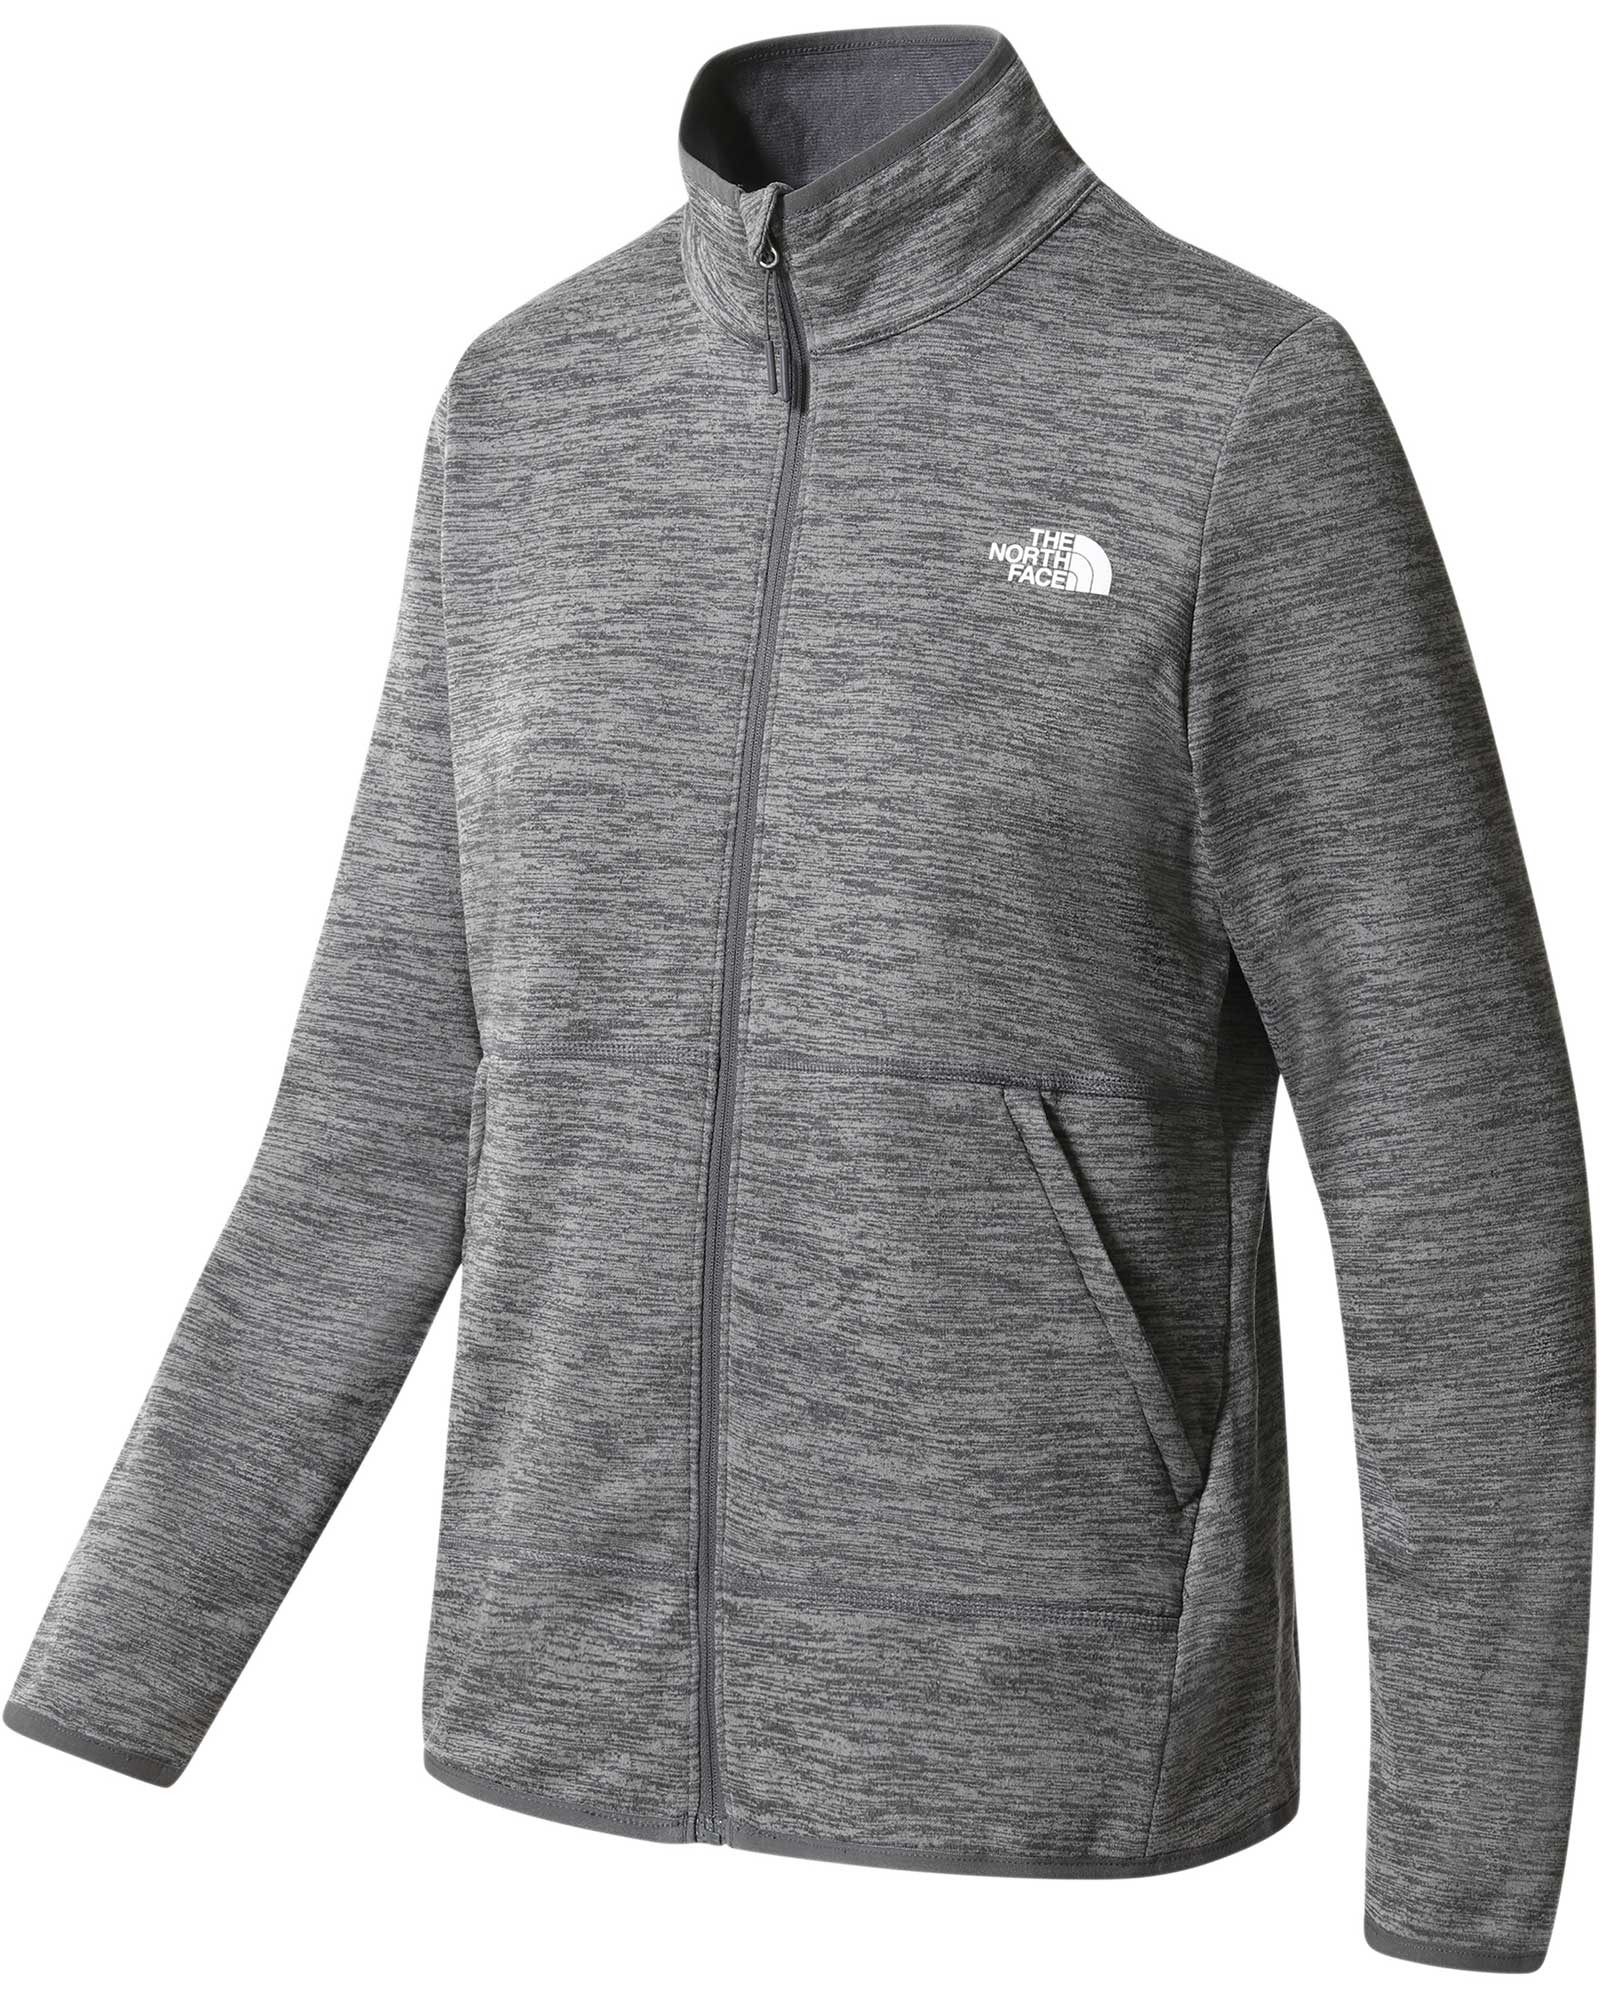 The North Face Canyonlands Womens Full Zip Jacket